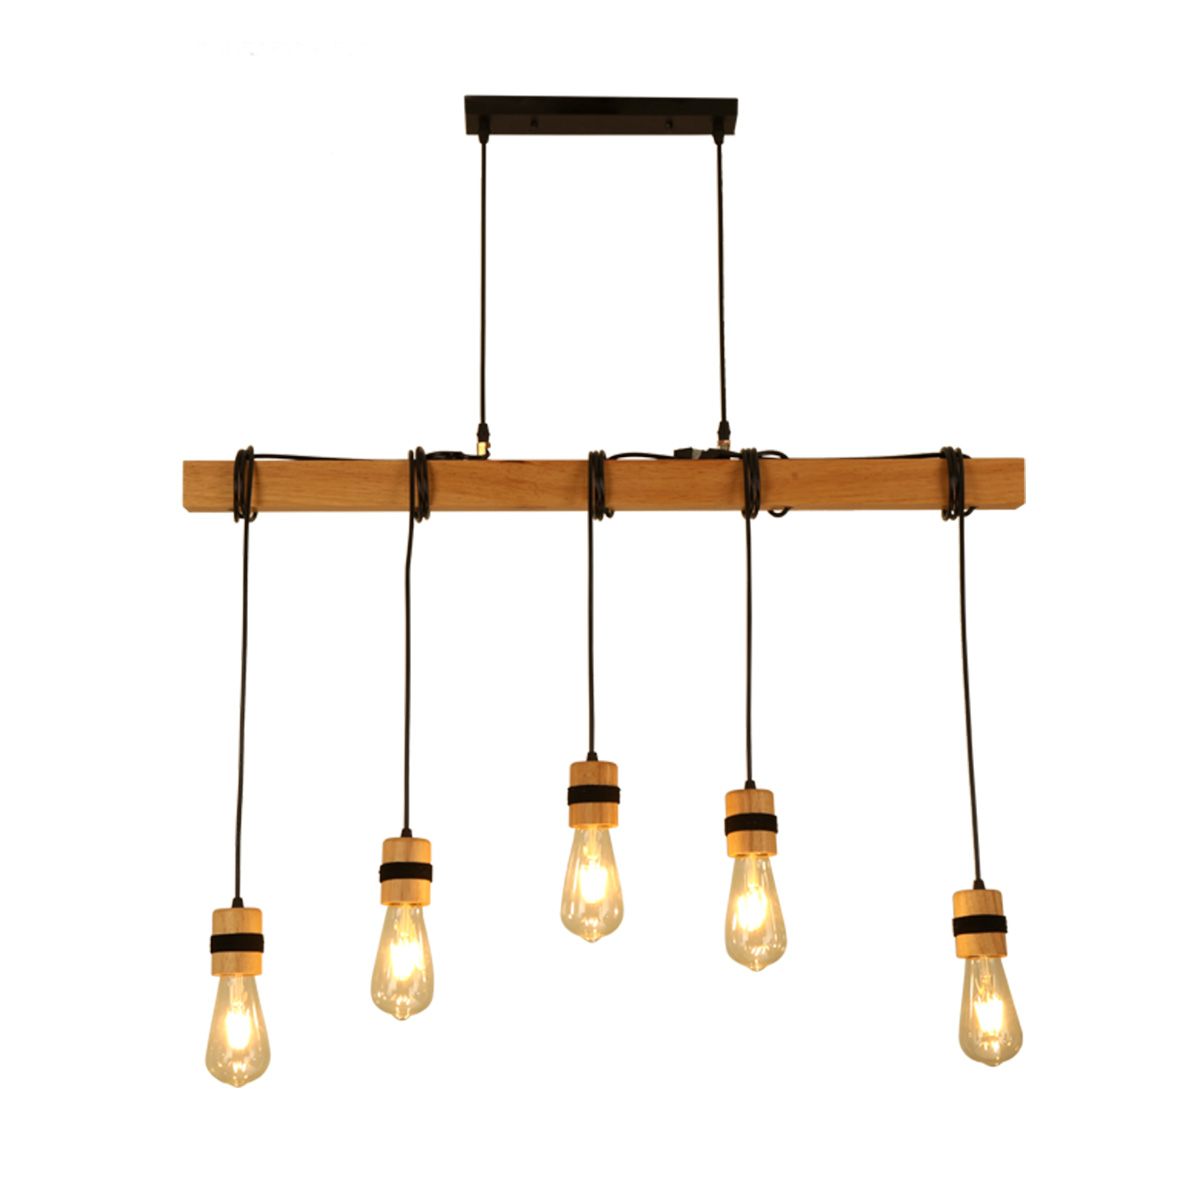 AC85-265V-Industrial-Wooden-E27-Pendant-Light-Ceiling-Lamp-Chandeliers-Lighting-Fixtures-Without-Bul-1815131-2